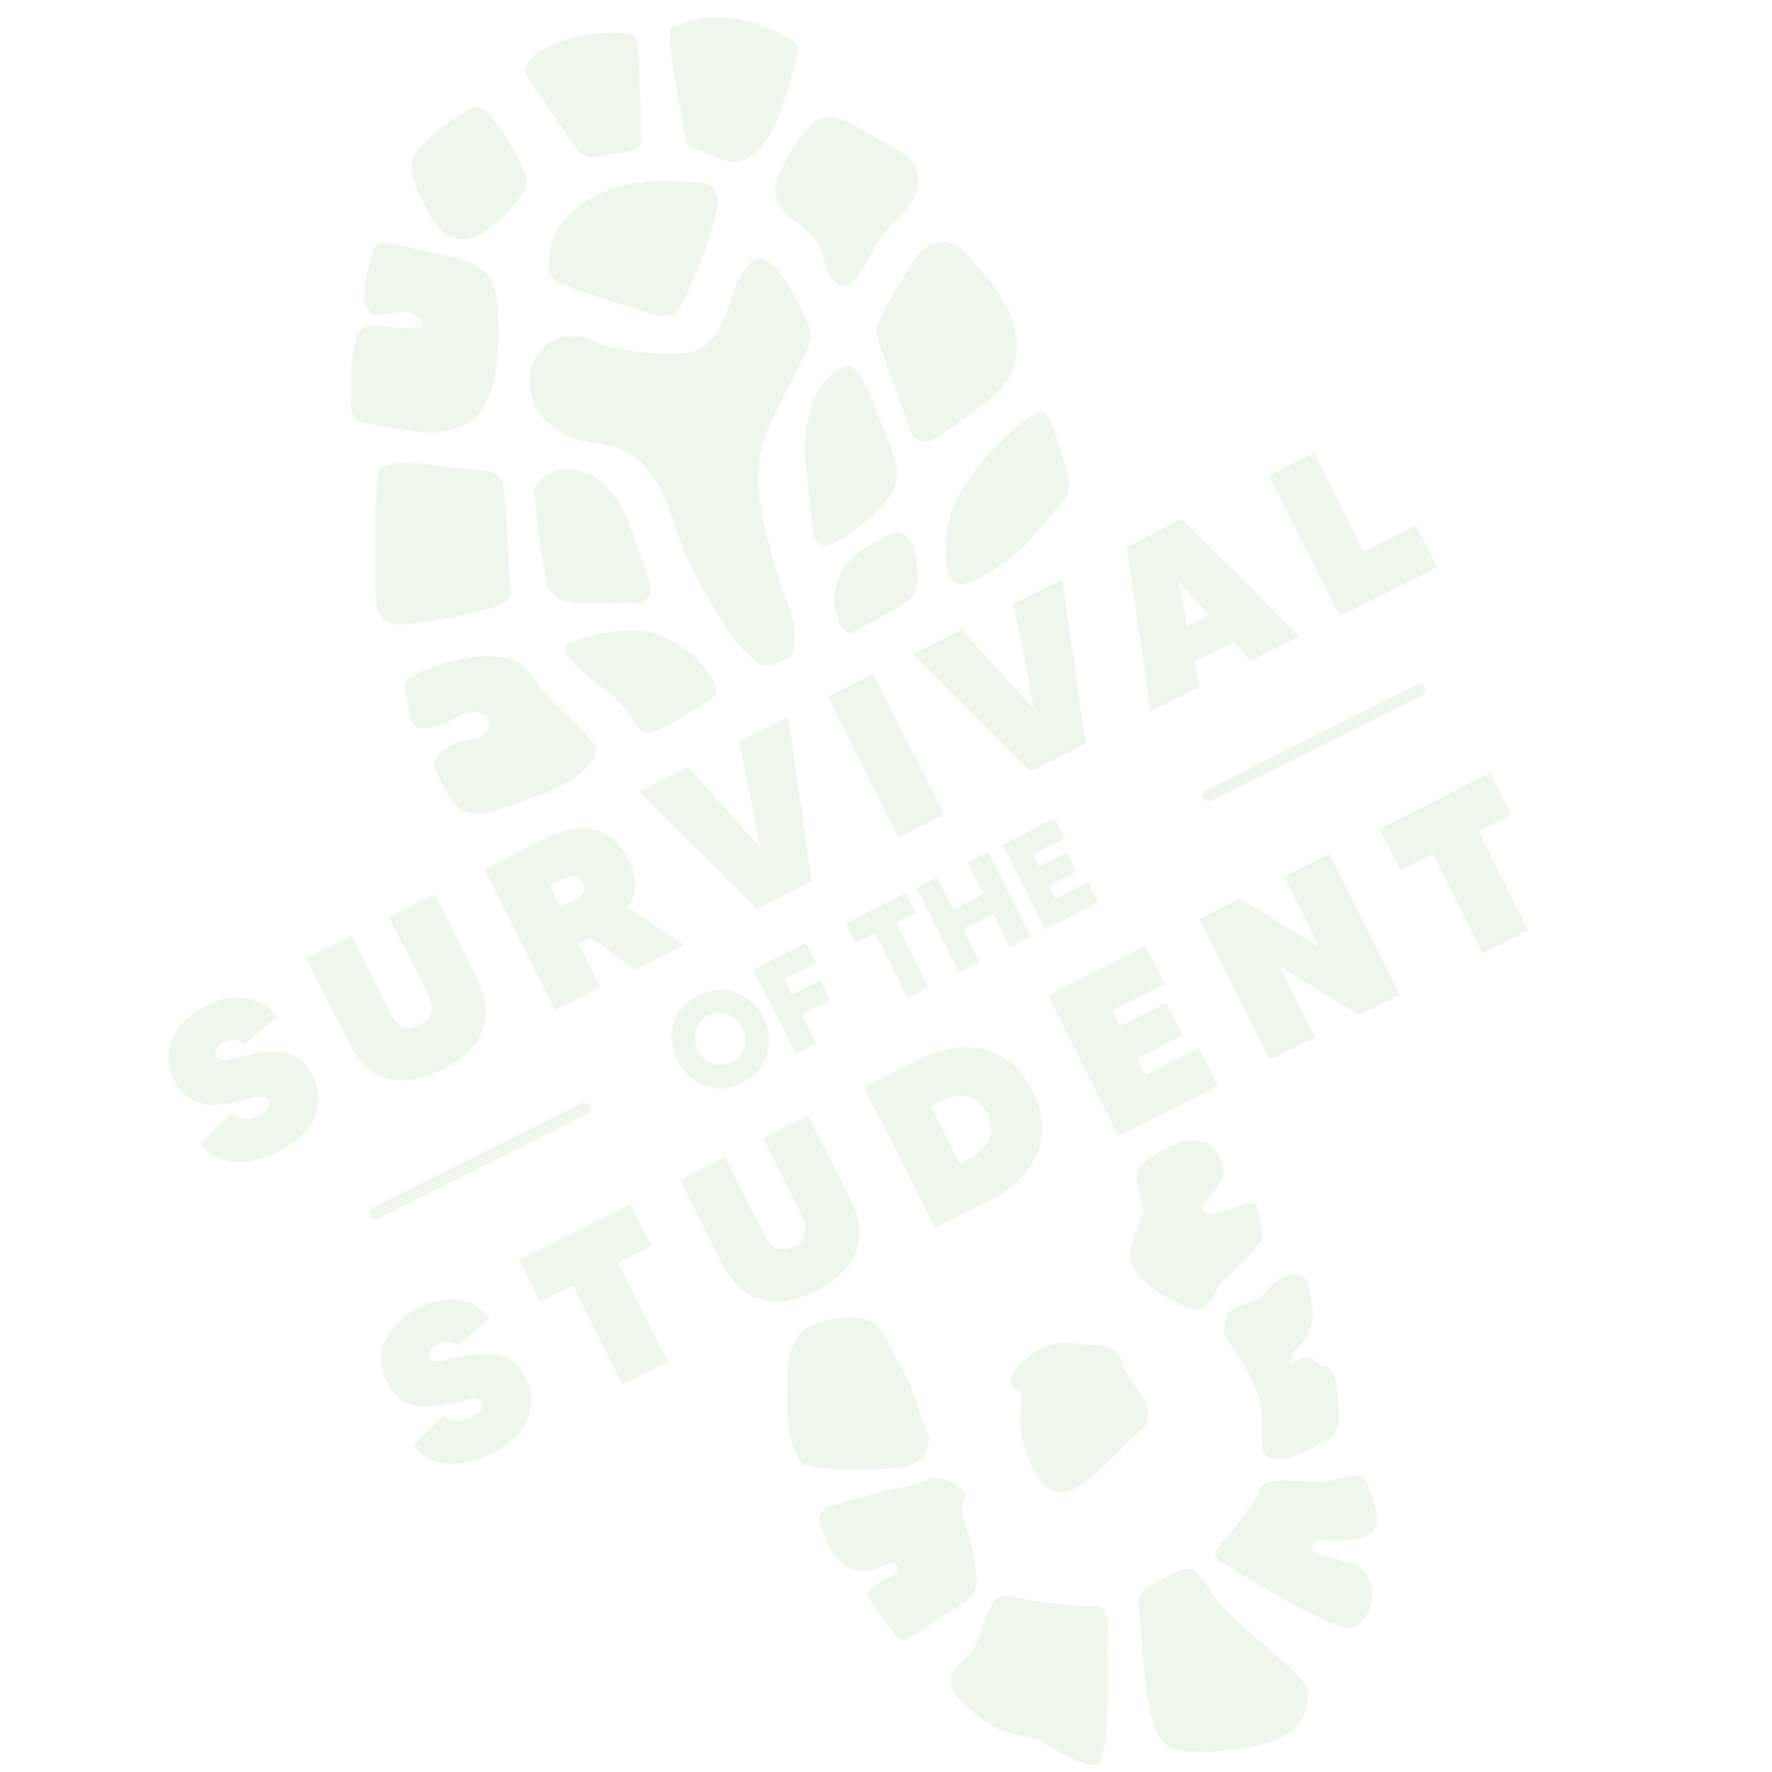 Survival of the Student